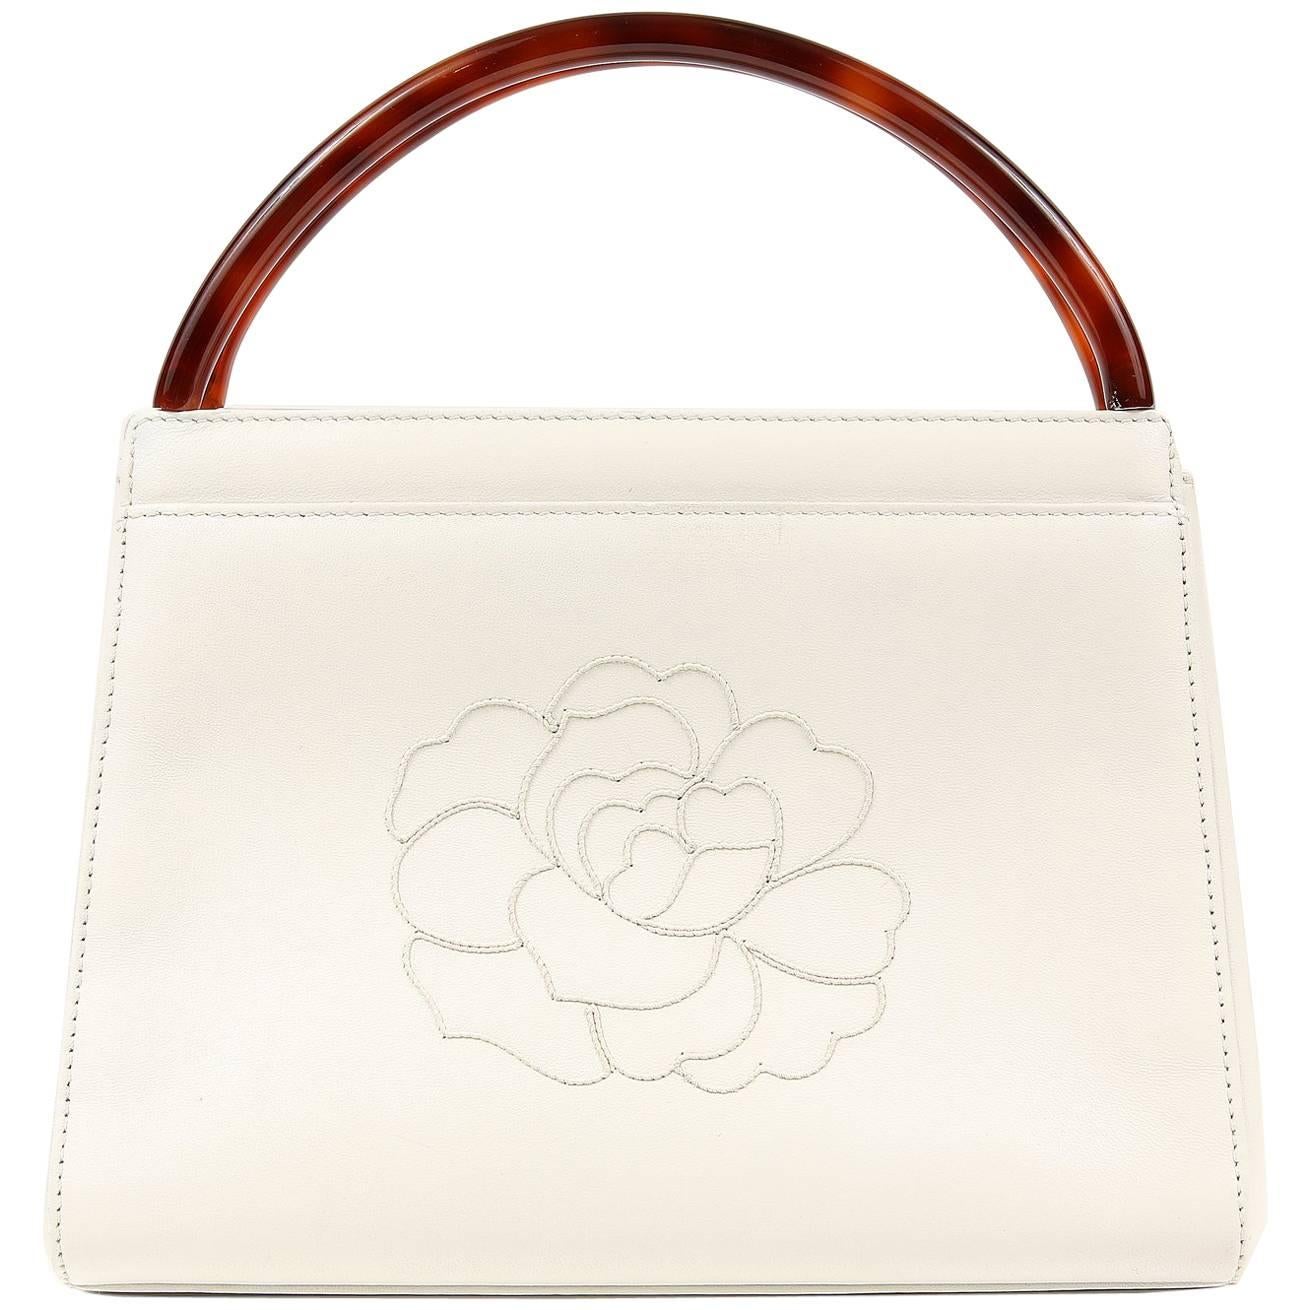 Chanel Vintage White Leather Camellia Day Bag with Bakelite Handles